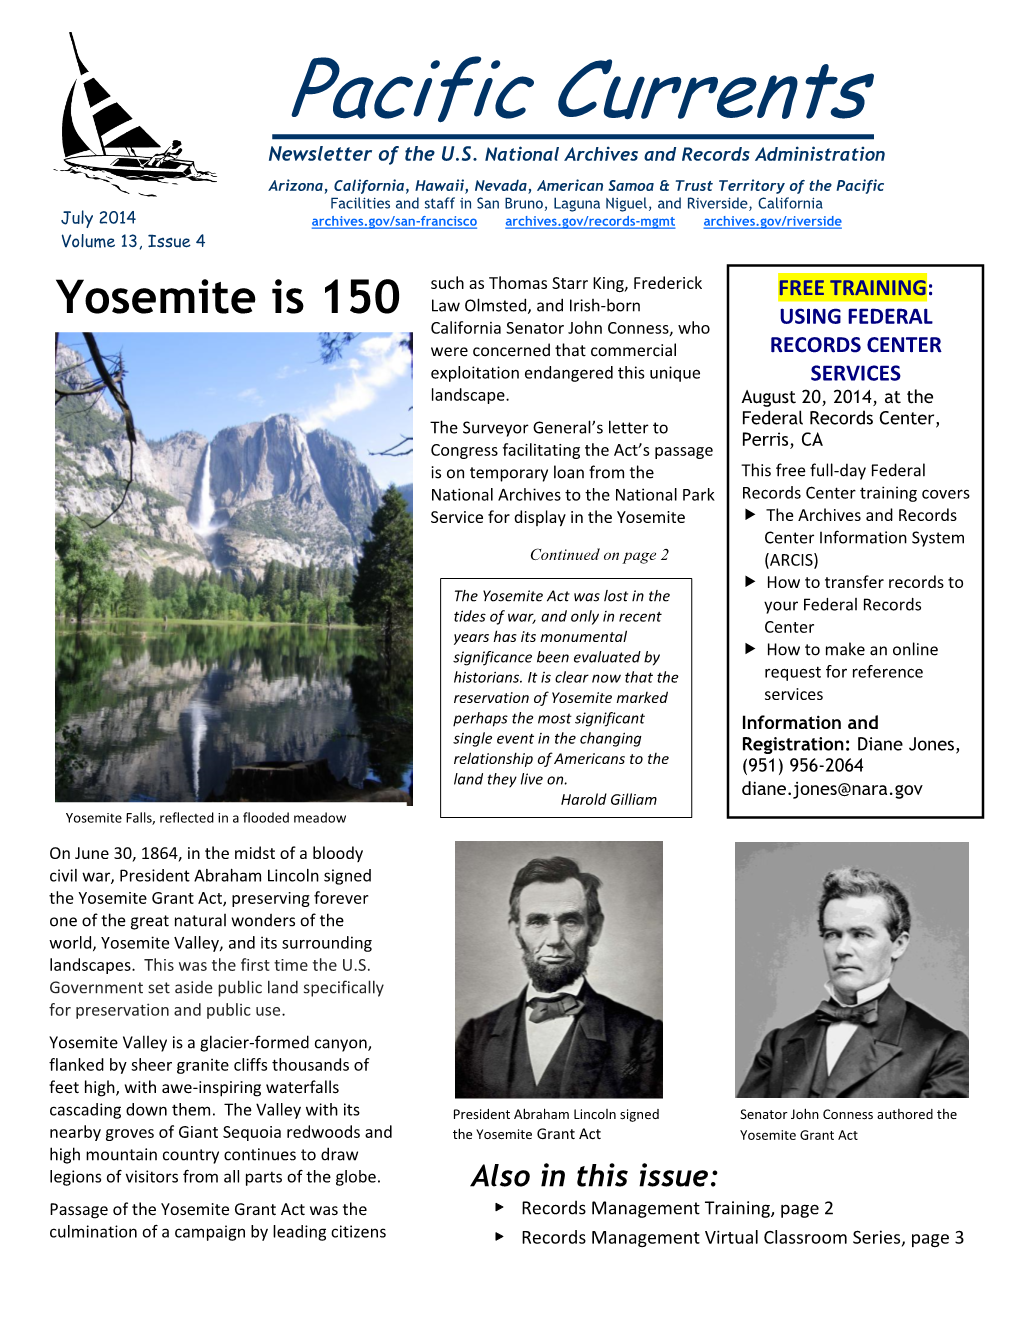 Pacific Currents Newsletter of the National Archives